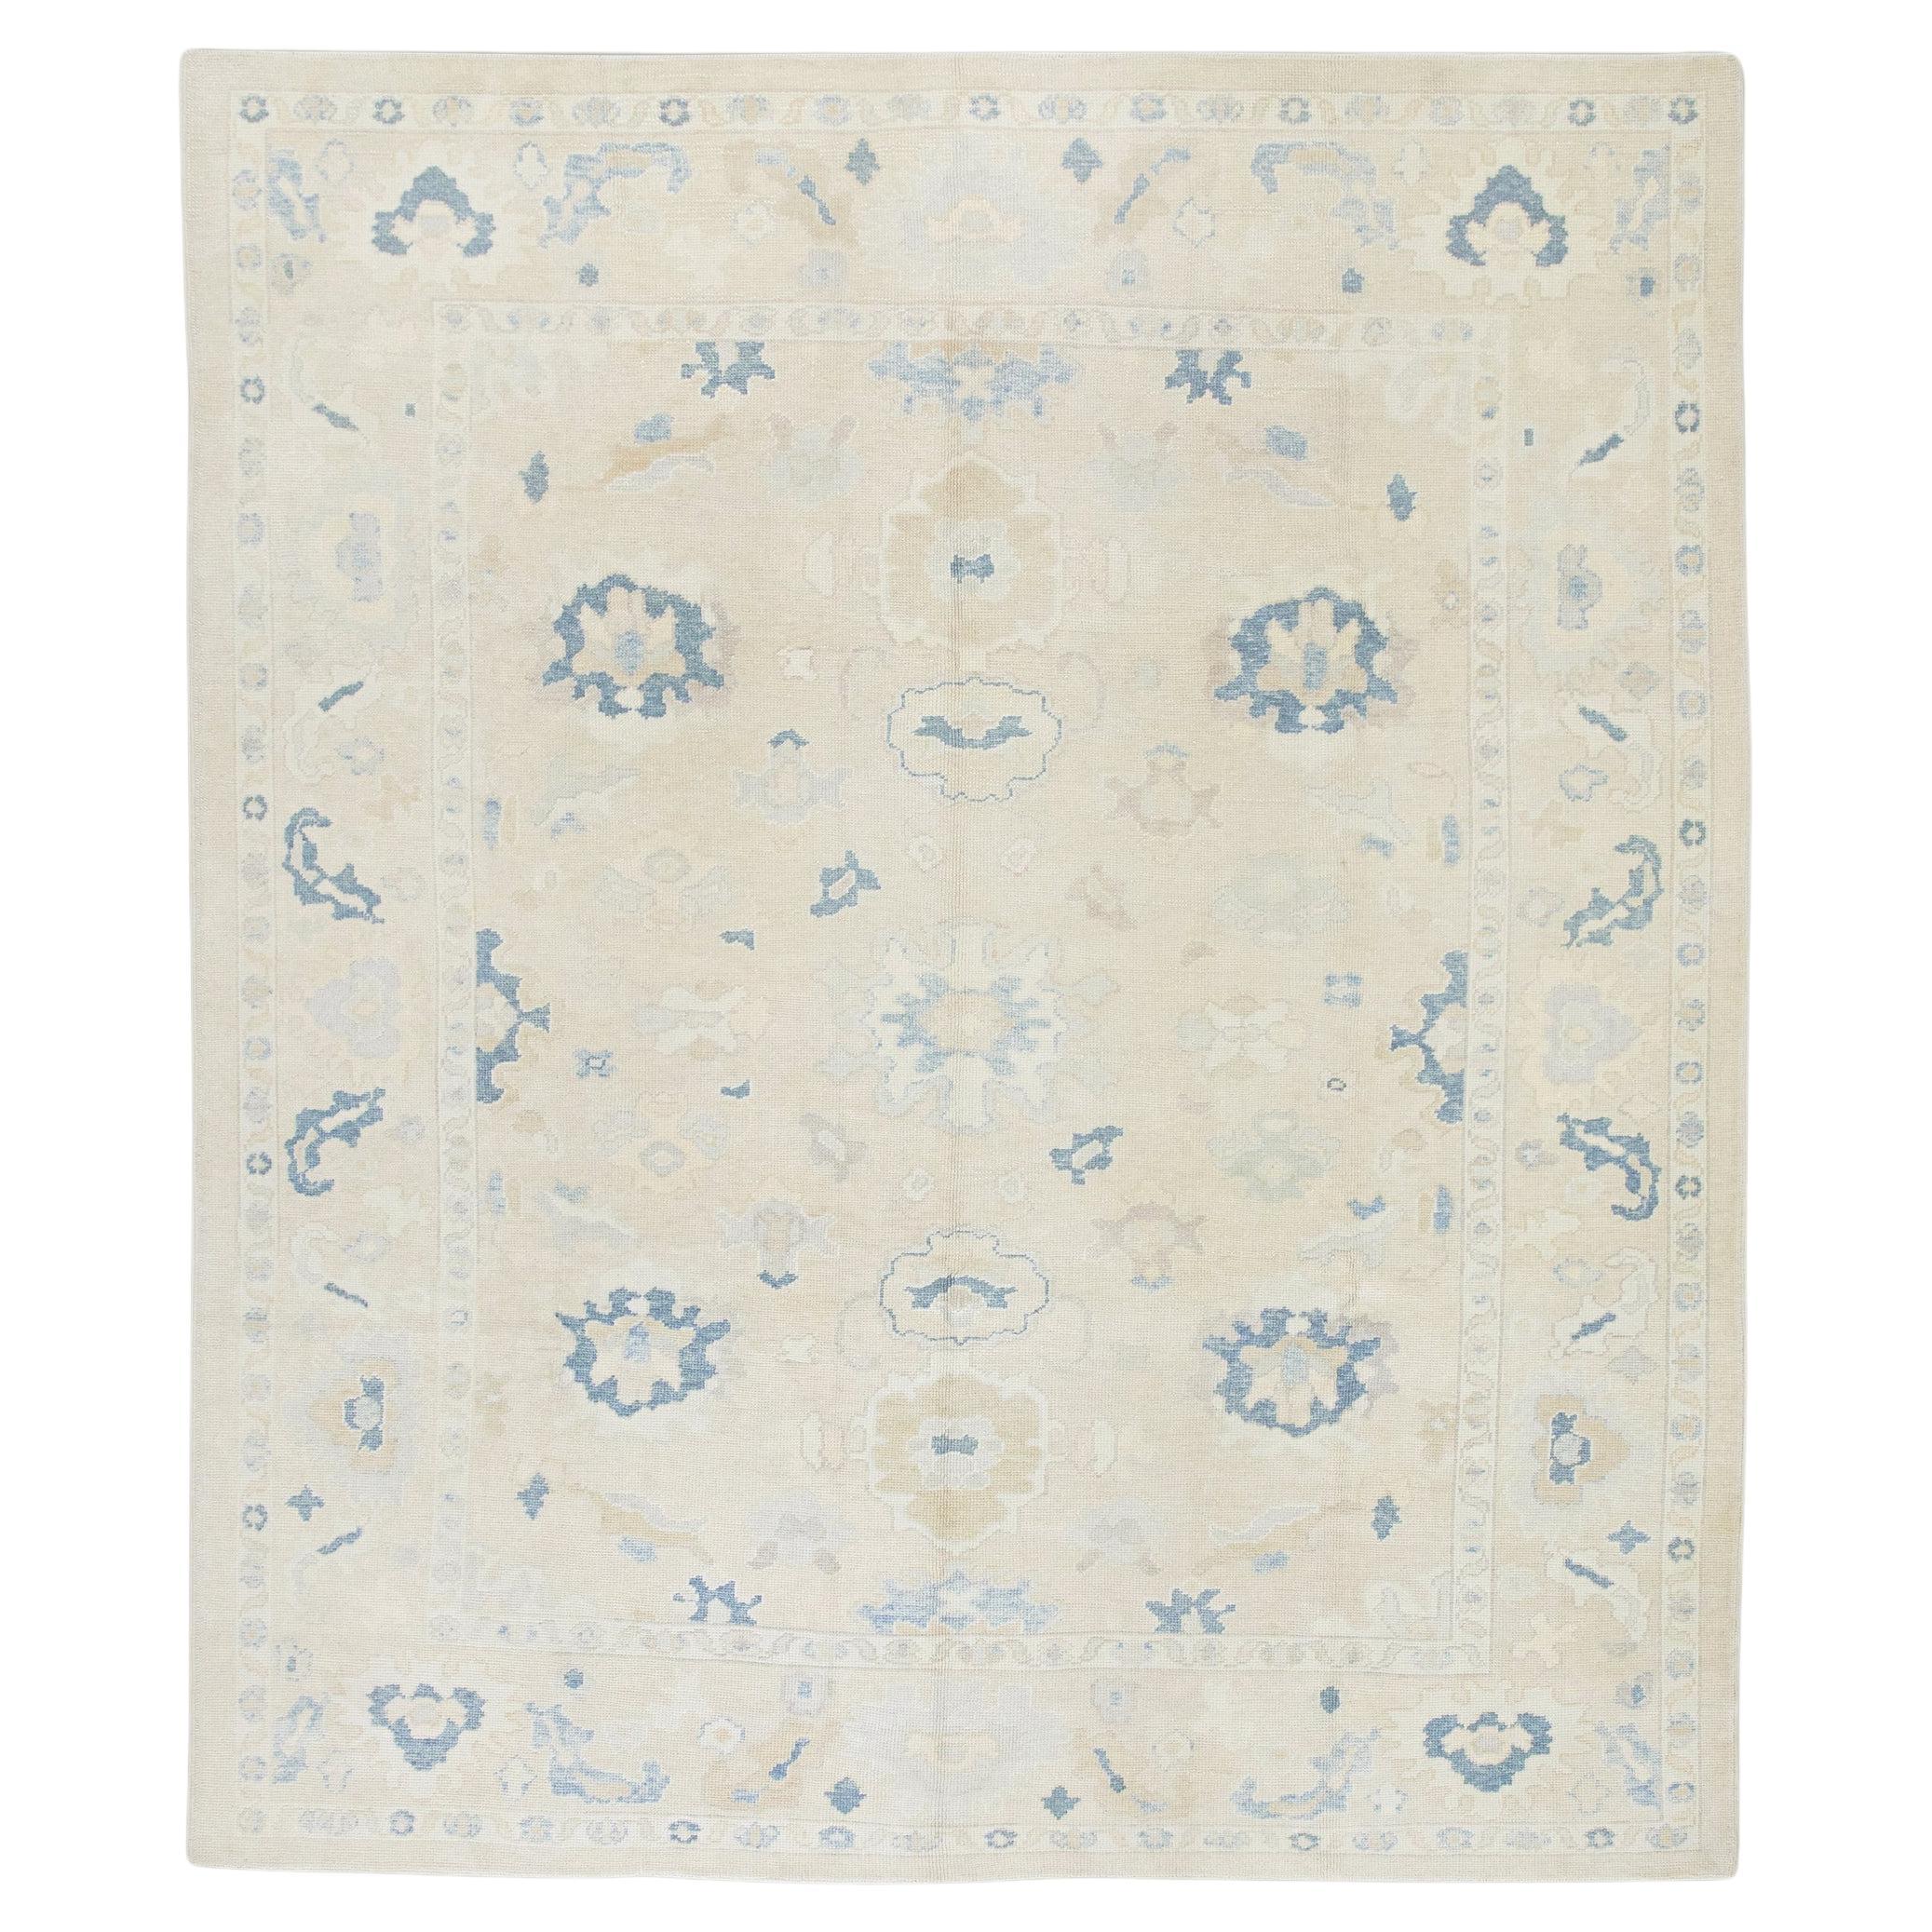 Cream Handwoven Wool Turkish Oushak Rug in Blue Floral Design 8'10" x 10'3" For Sale